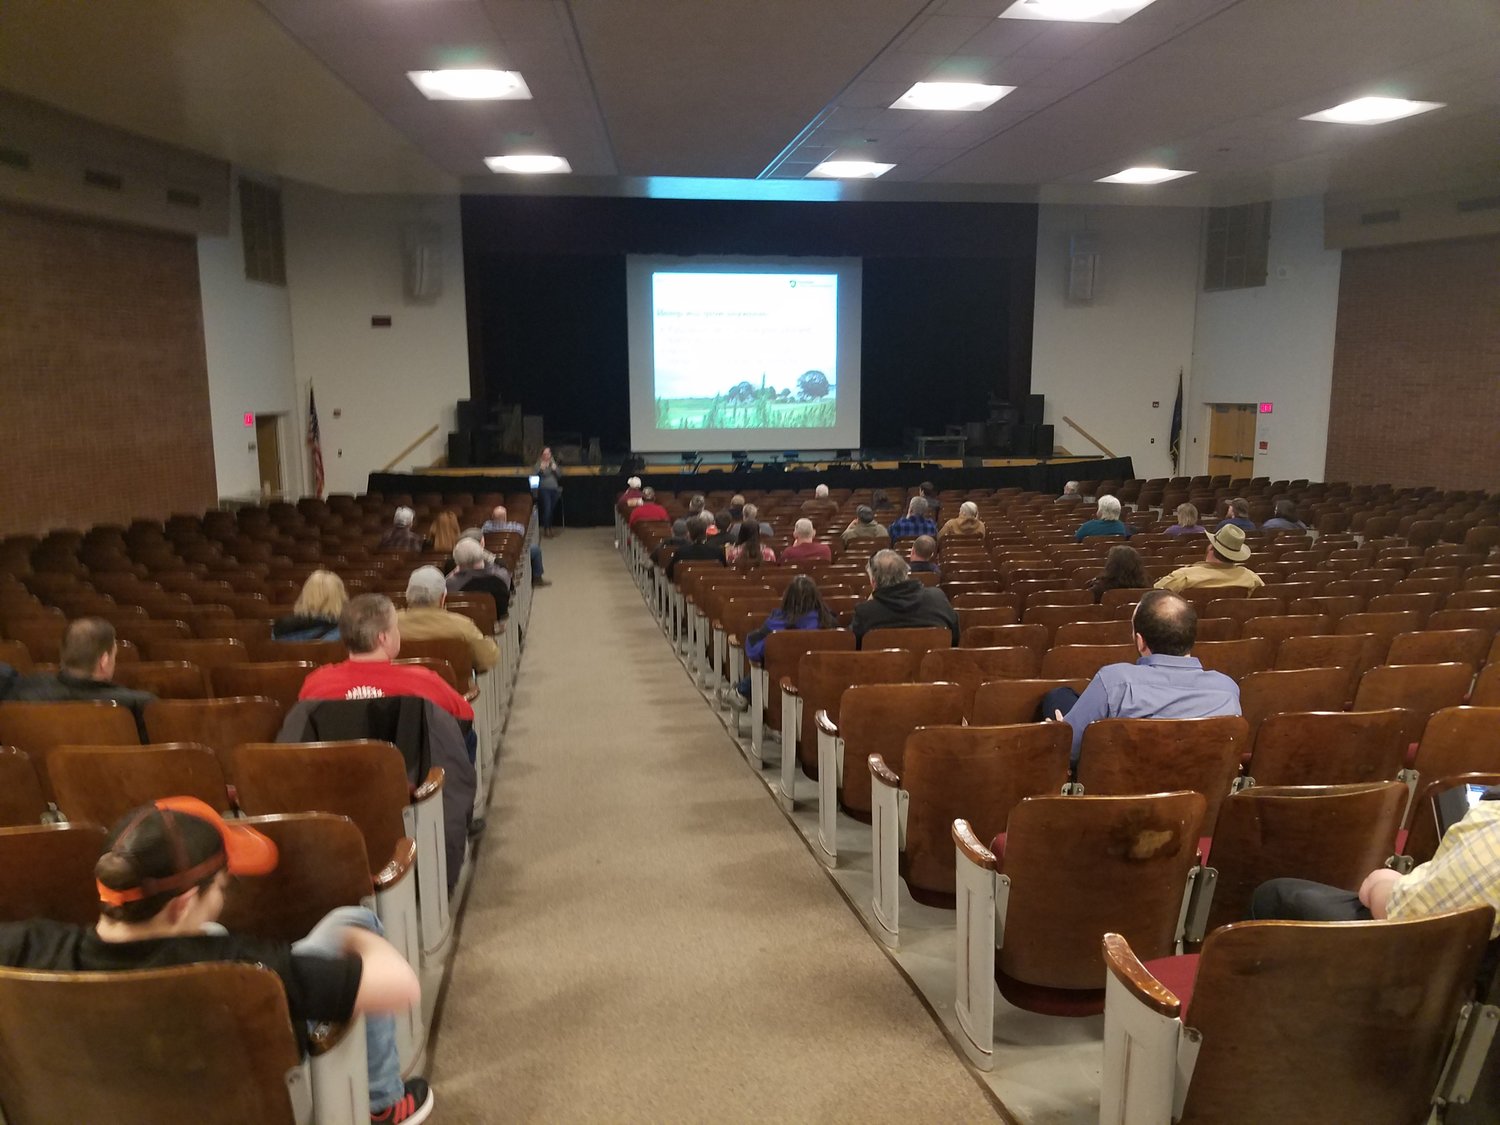 Farmers and interested attendees sat in the auditorium at HHS to learn about hemp production and the various aspects related to this up and coming industry.